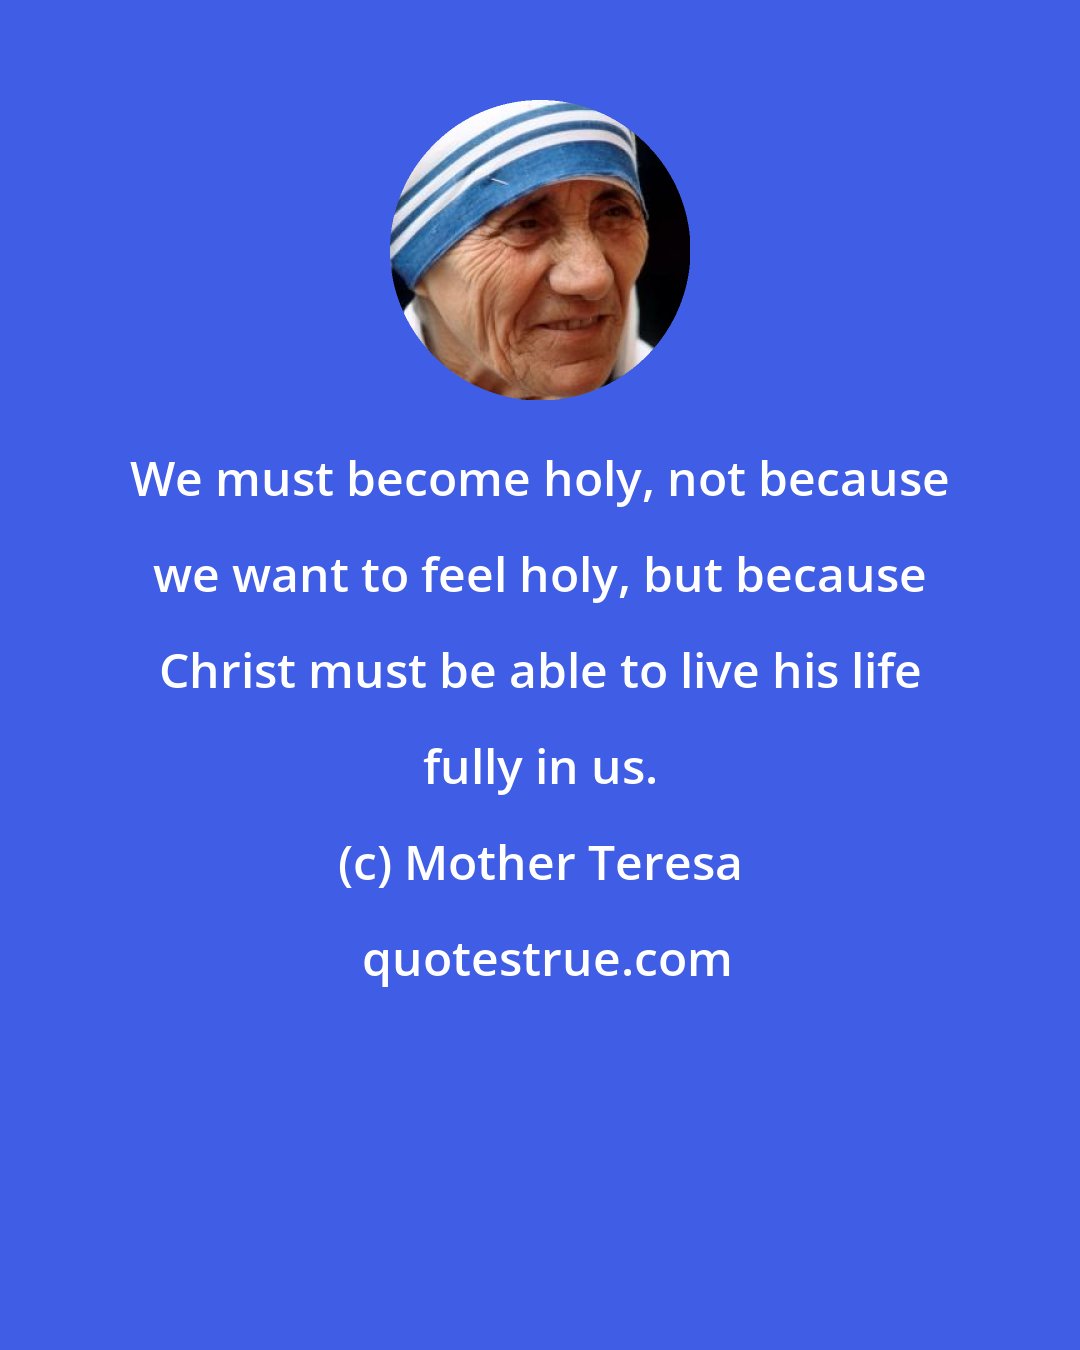 Mother Teresa: We must become holy, not because we want to feel holy, but because Christ must be able to live his life fully in us.